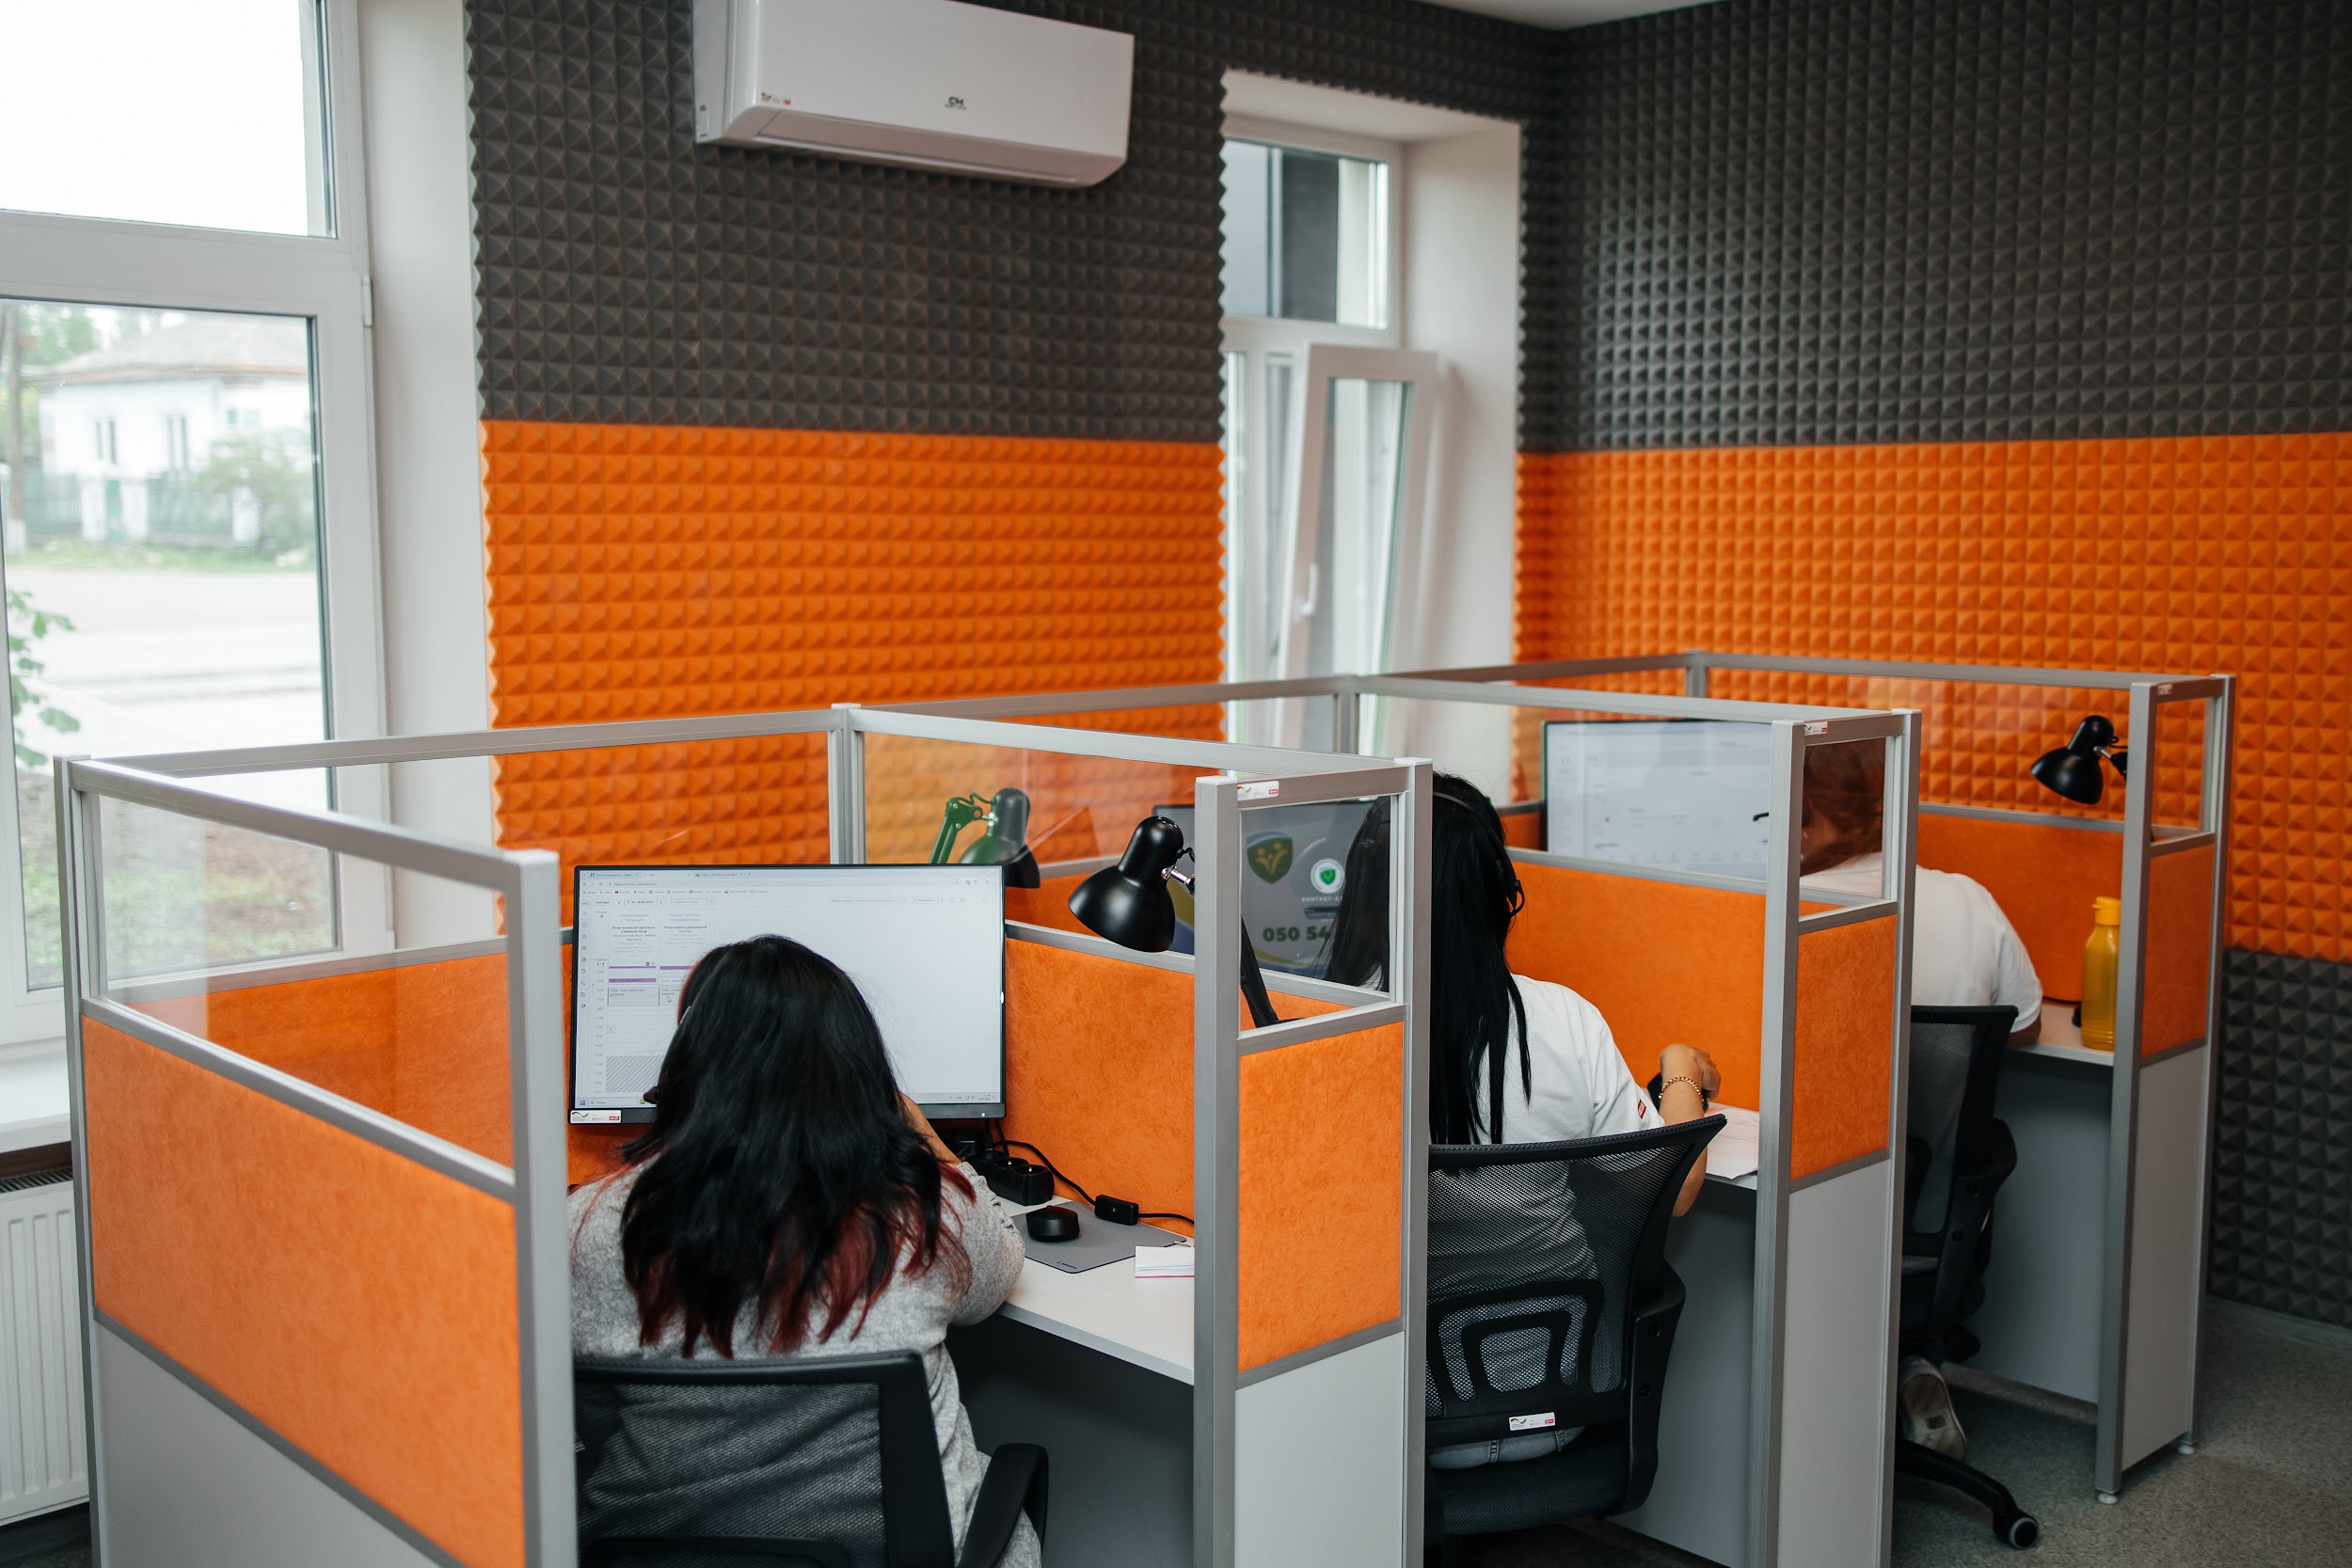 A call center was opened based on health care facilities in another district of the Mykolaiv region